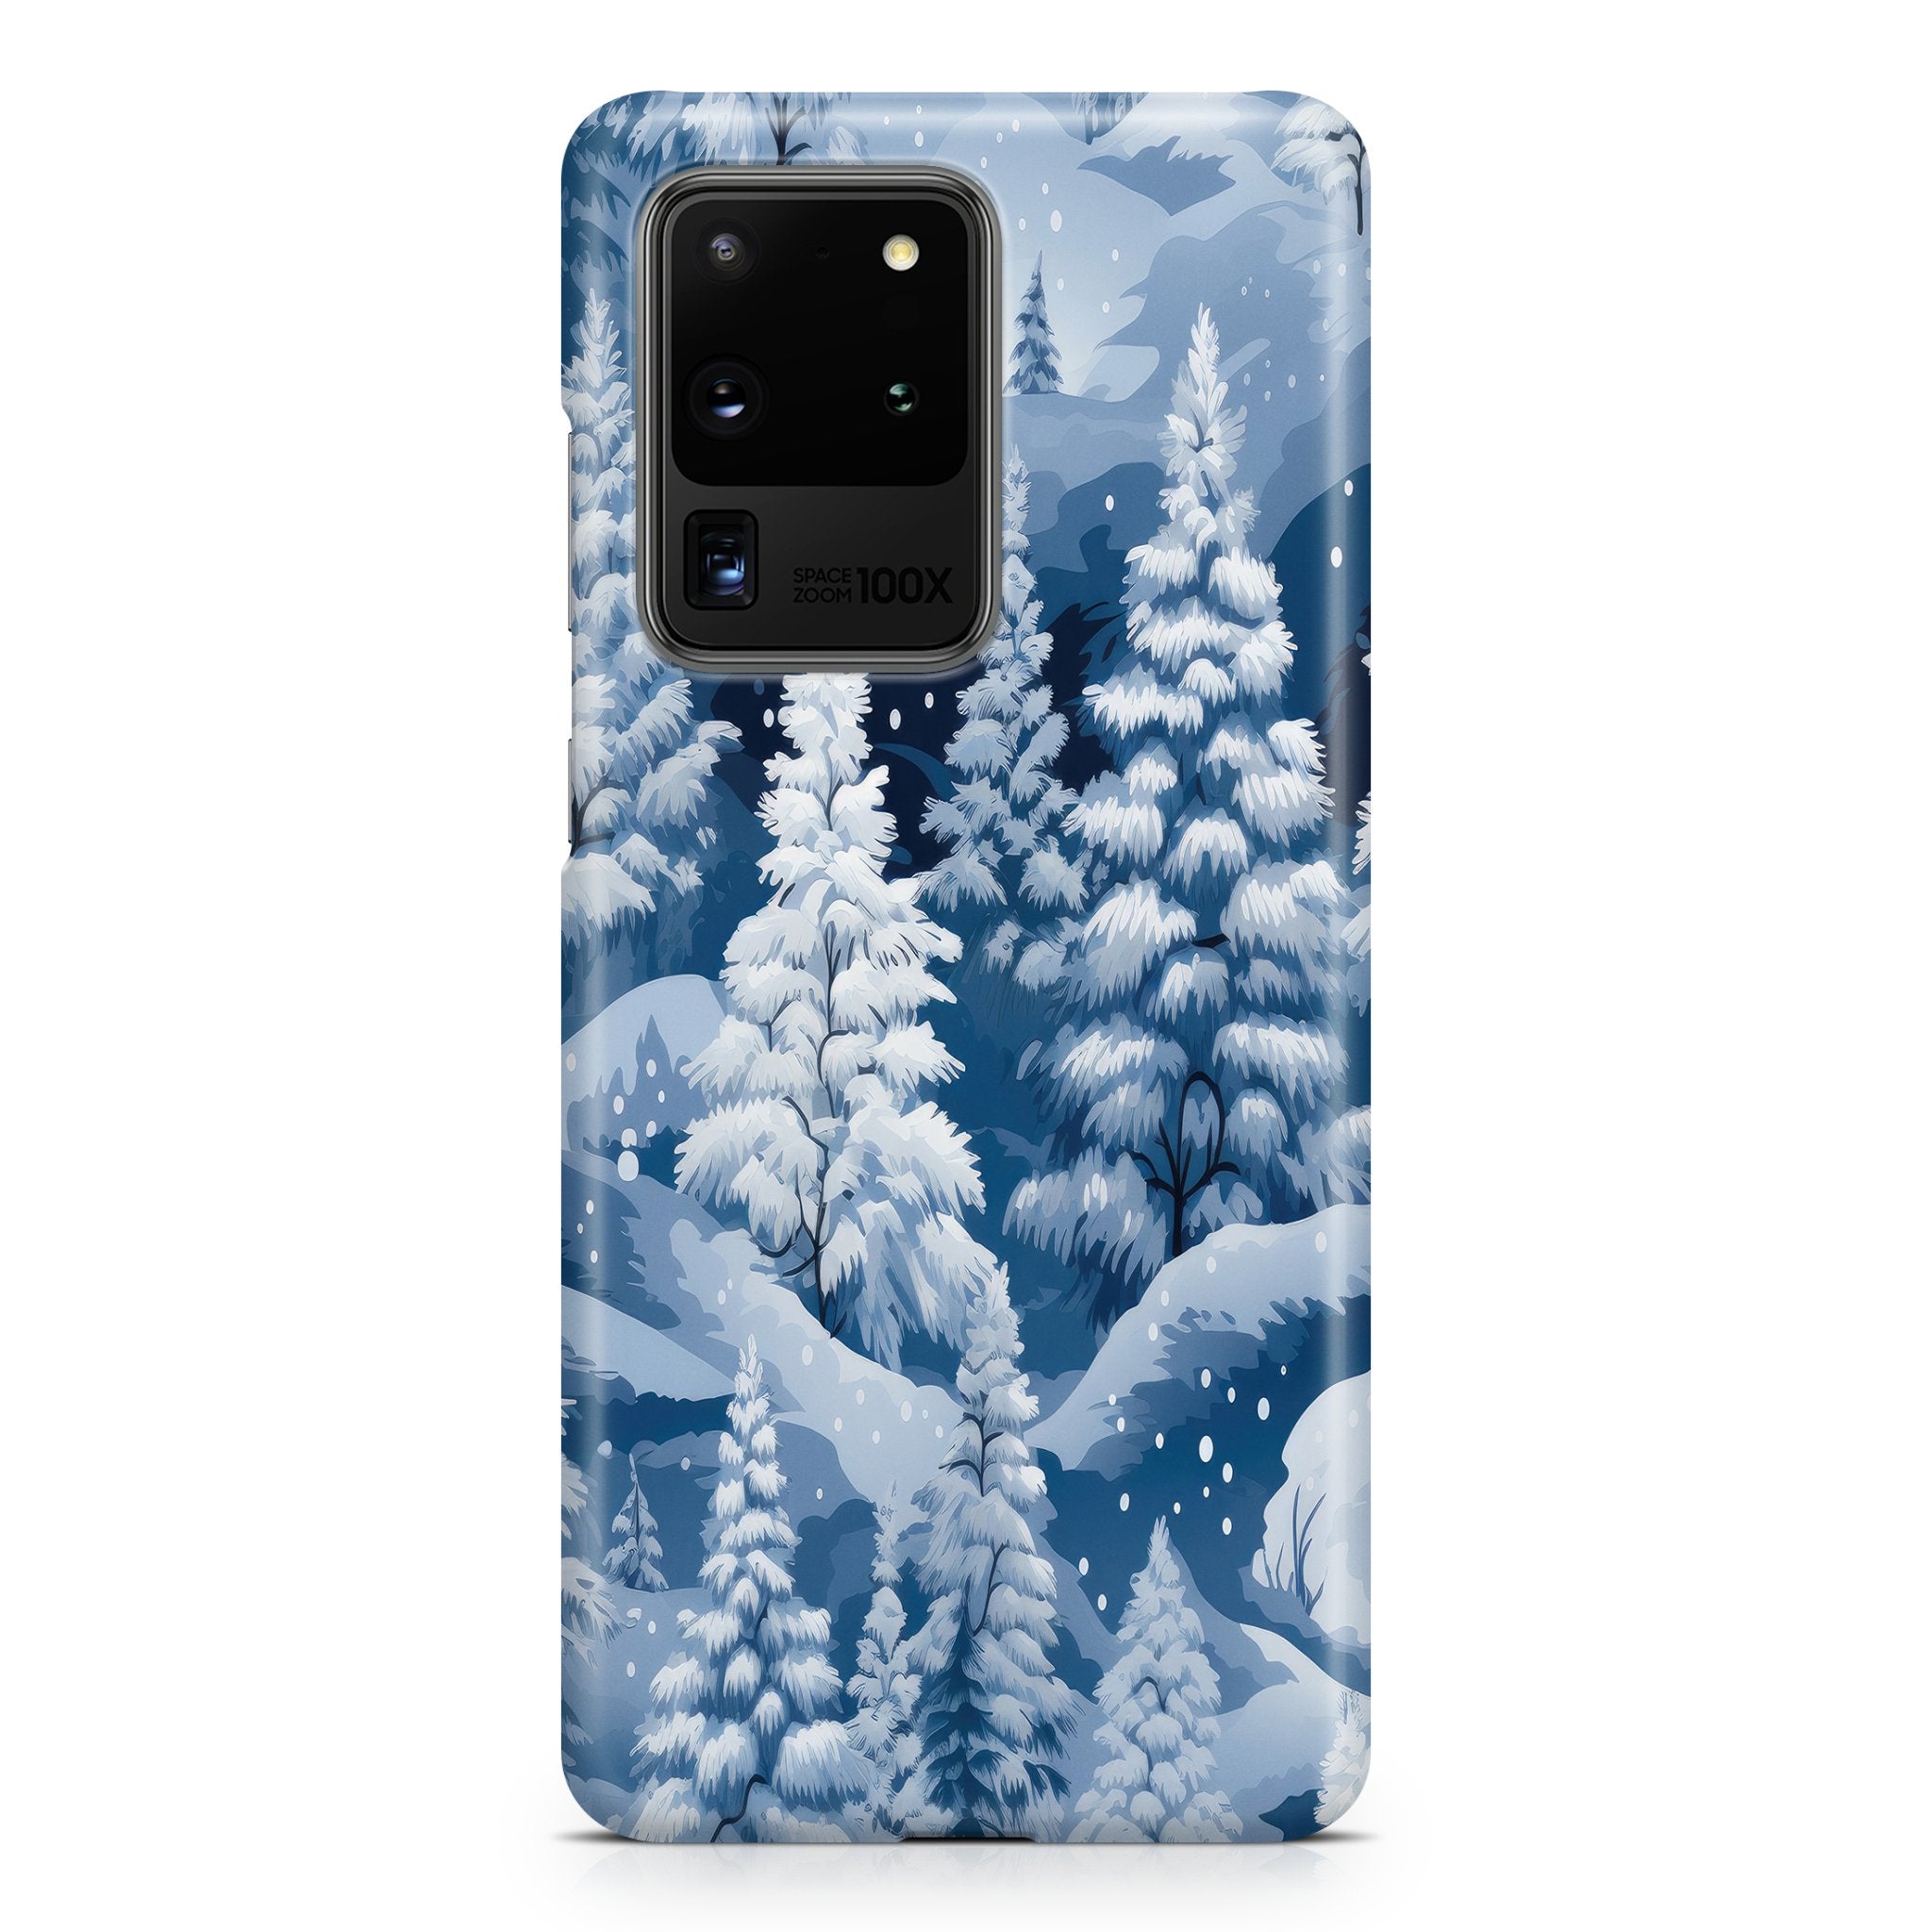 Snowy Symphony - Samsung phone case designs by CaseSwagger